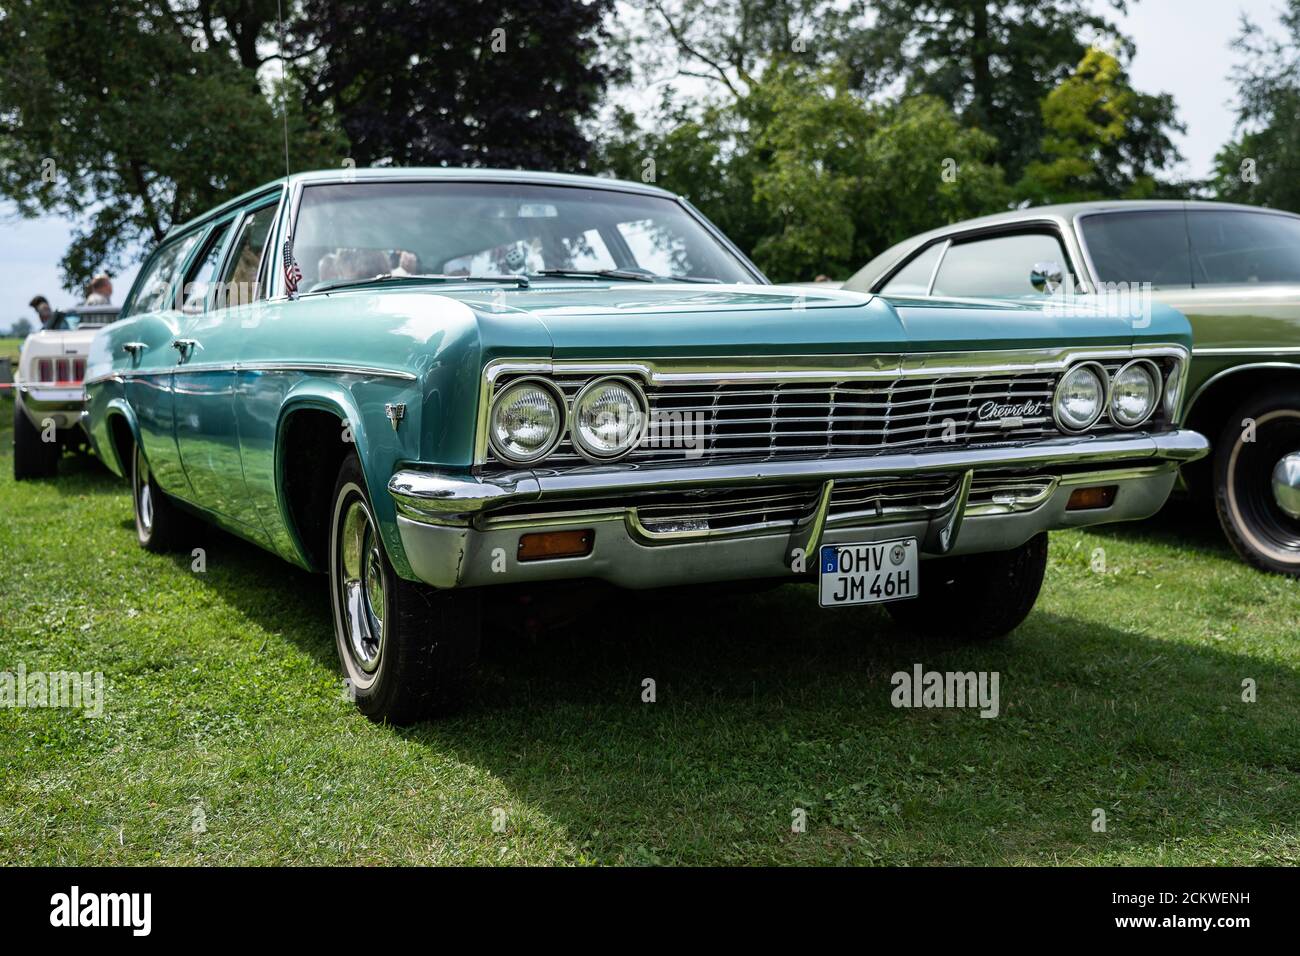 DIEDERSDORF, GERMANY - AUGUST 30, 2020: The full-size car Chevrolet Caprice Estate, 1966. The exhibition of 'US Car Classics'. Stock Photo